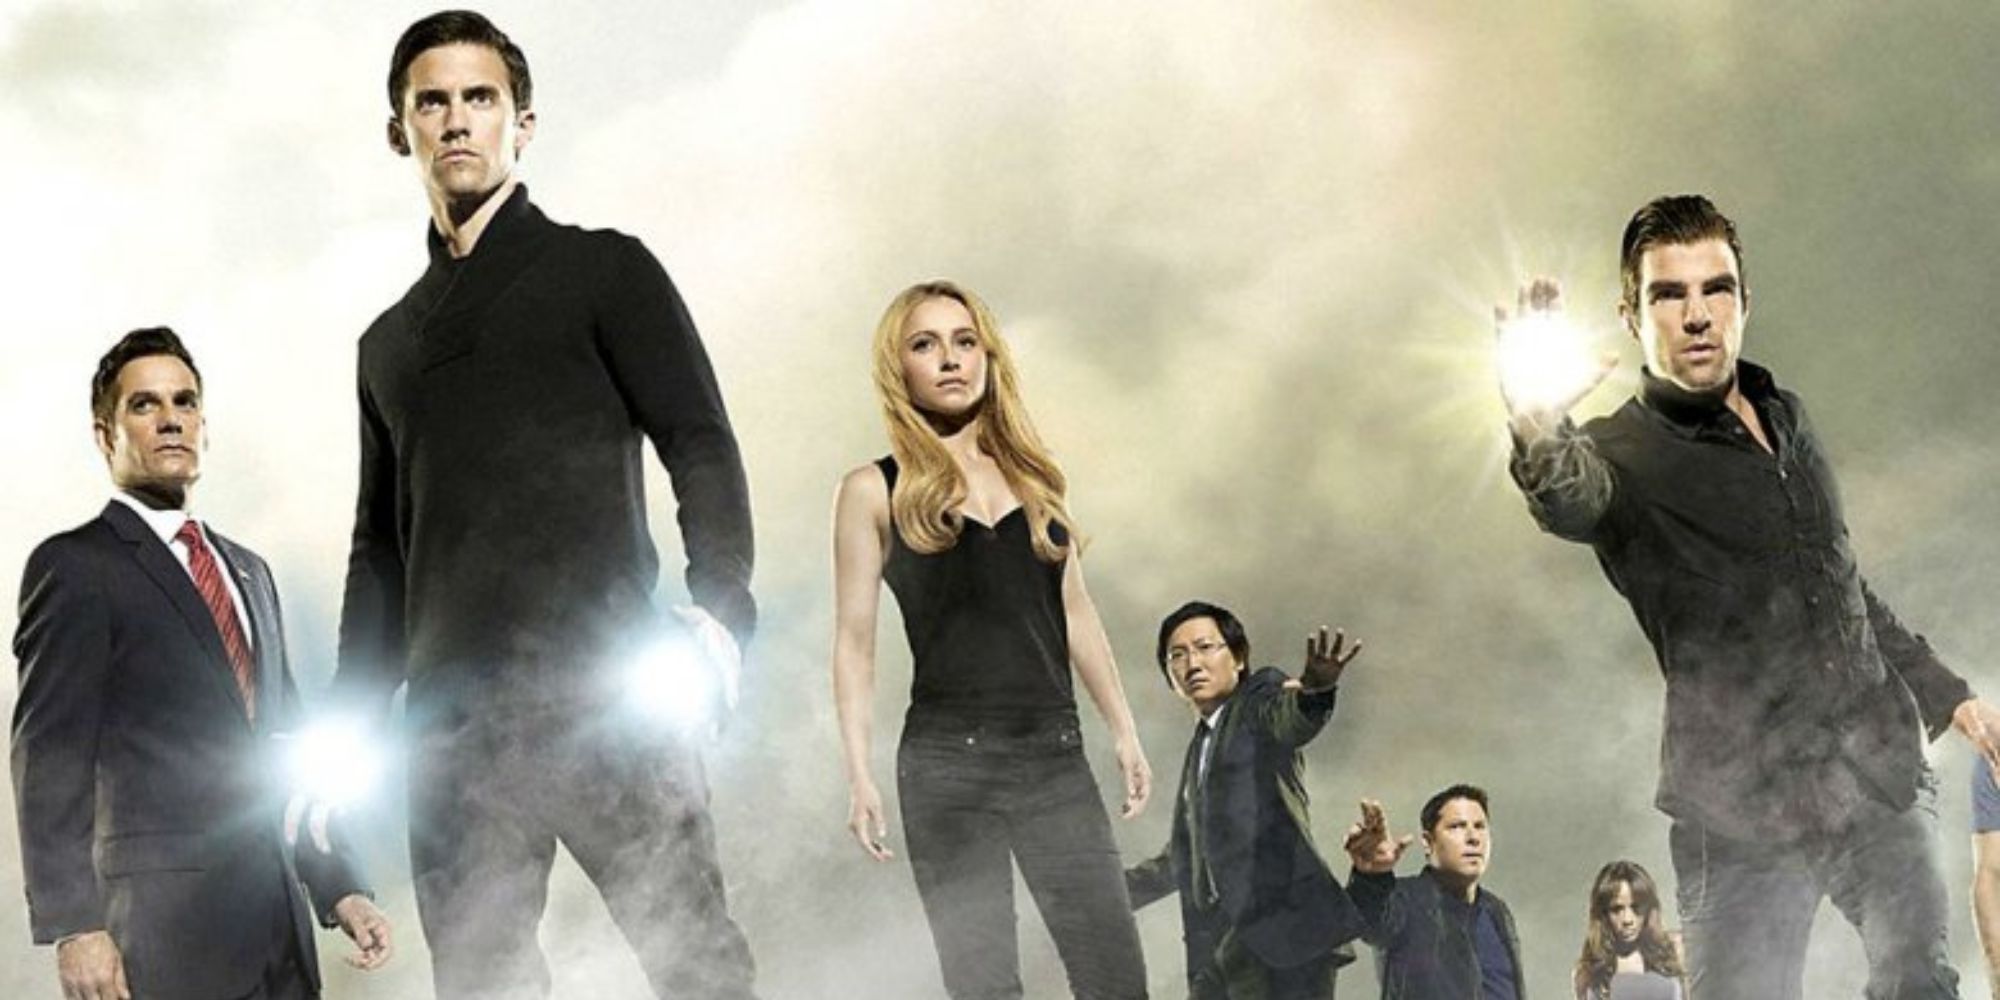 The main characters of Heroes in a promotional image for the show.